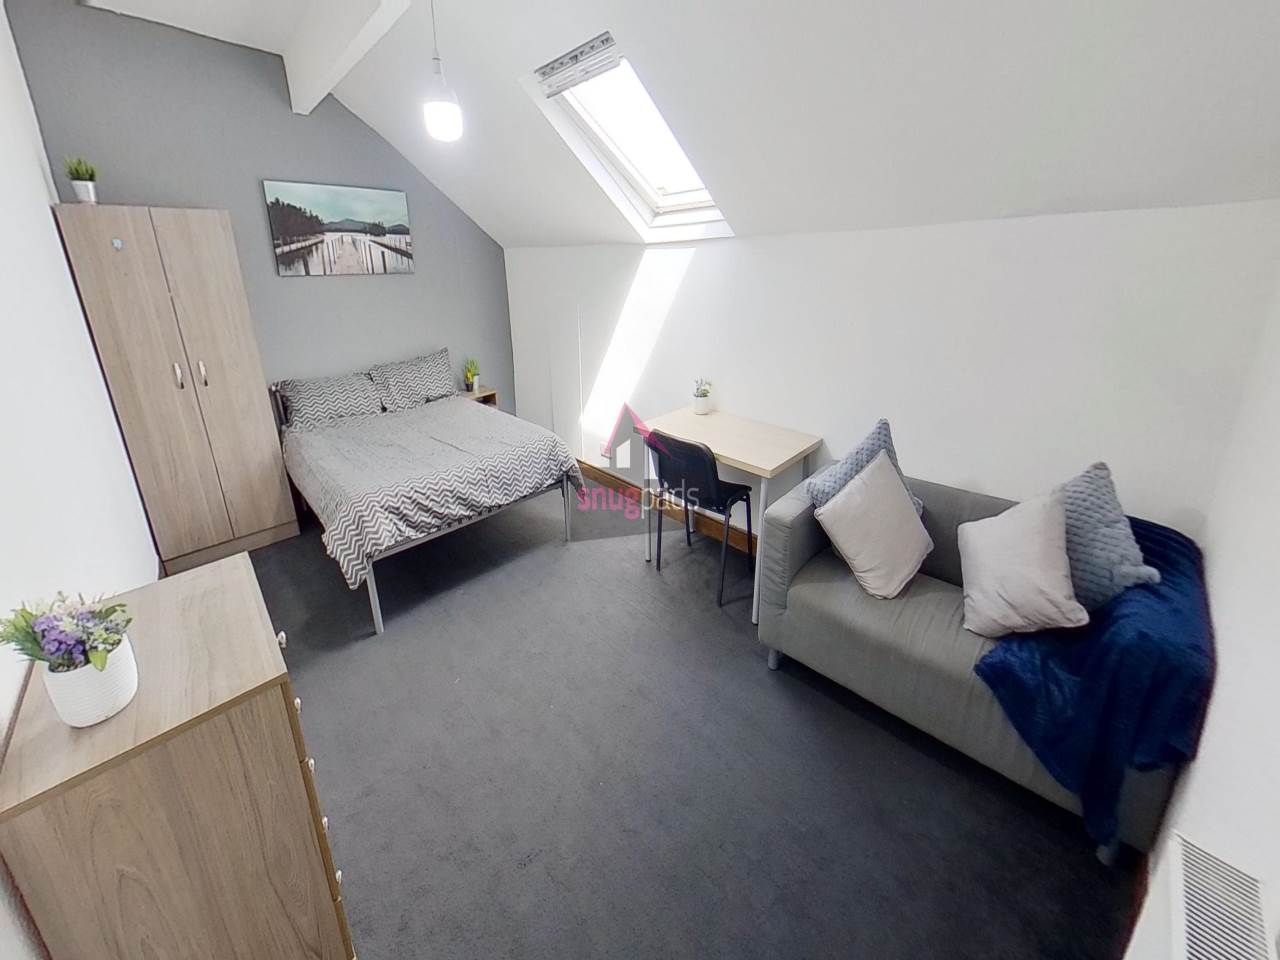 1 bed Room for rent in Brindle Heath. From SnugPads